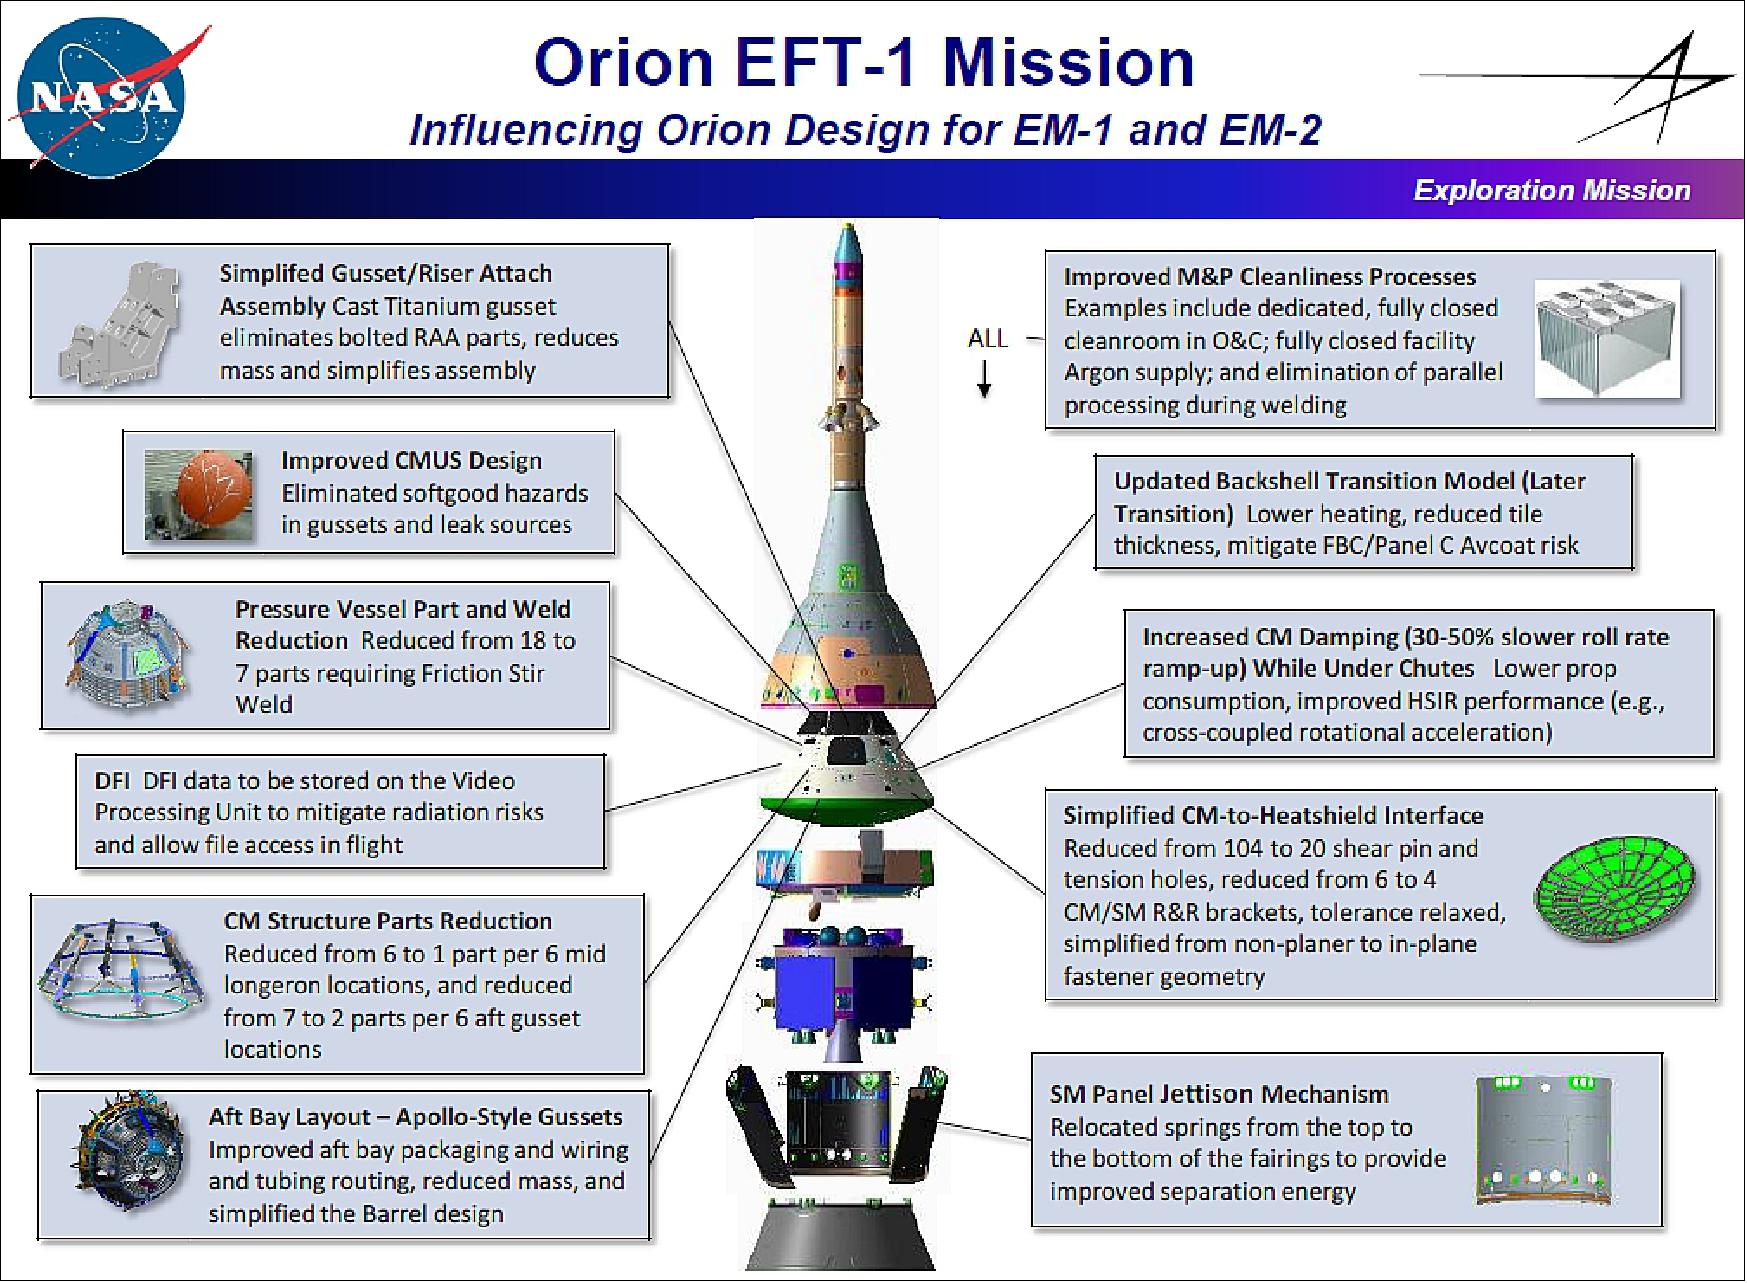 Figure 10: Some highlights of the numerous design changes made as a result of the EFT-1 flight (image credit: NASA, Lockheed Martin)